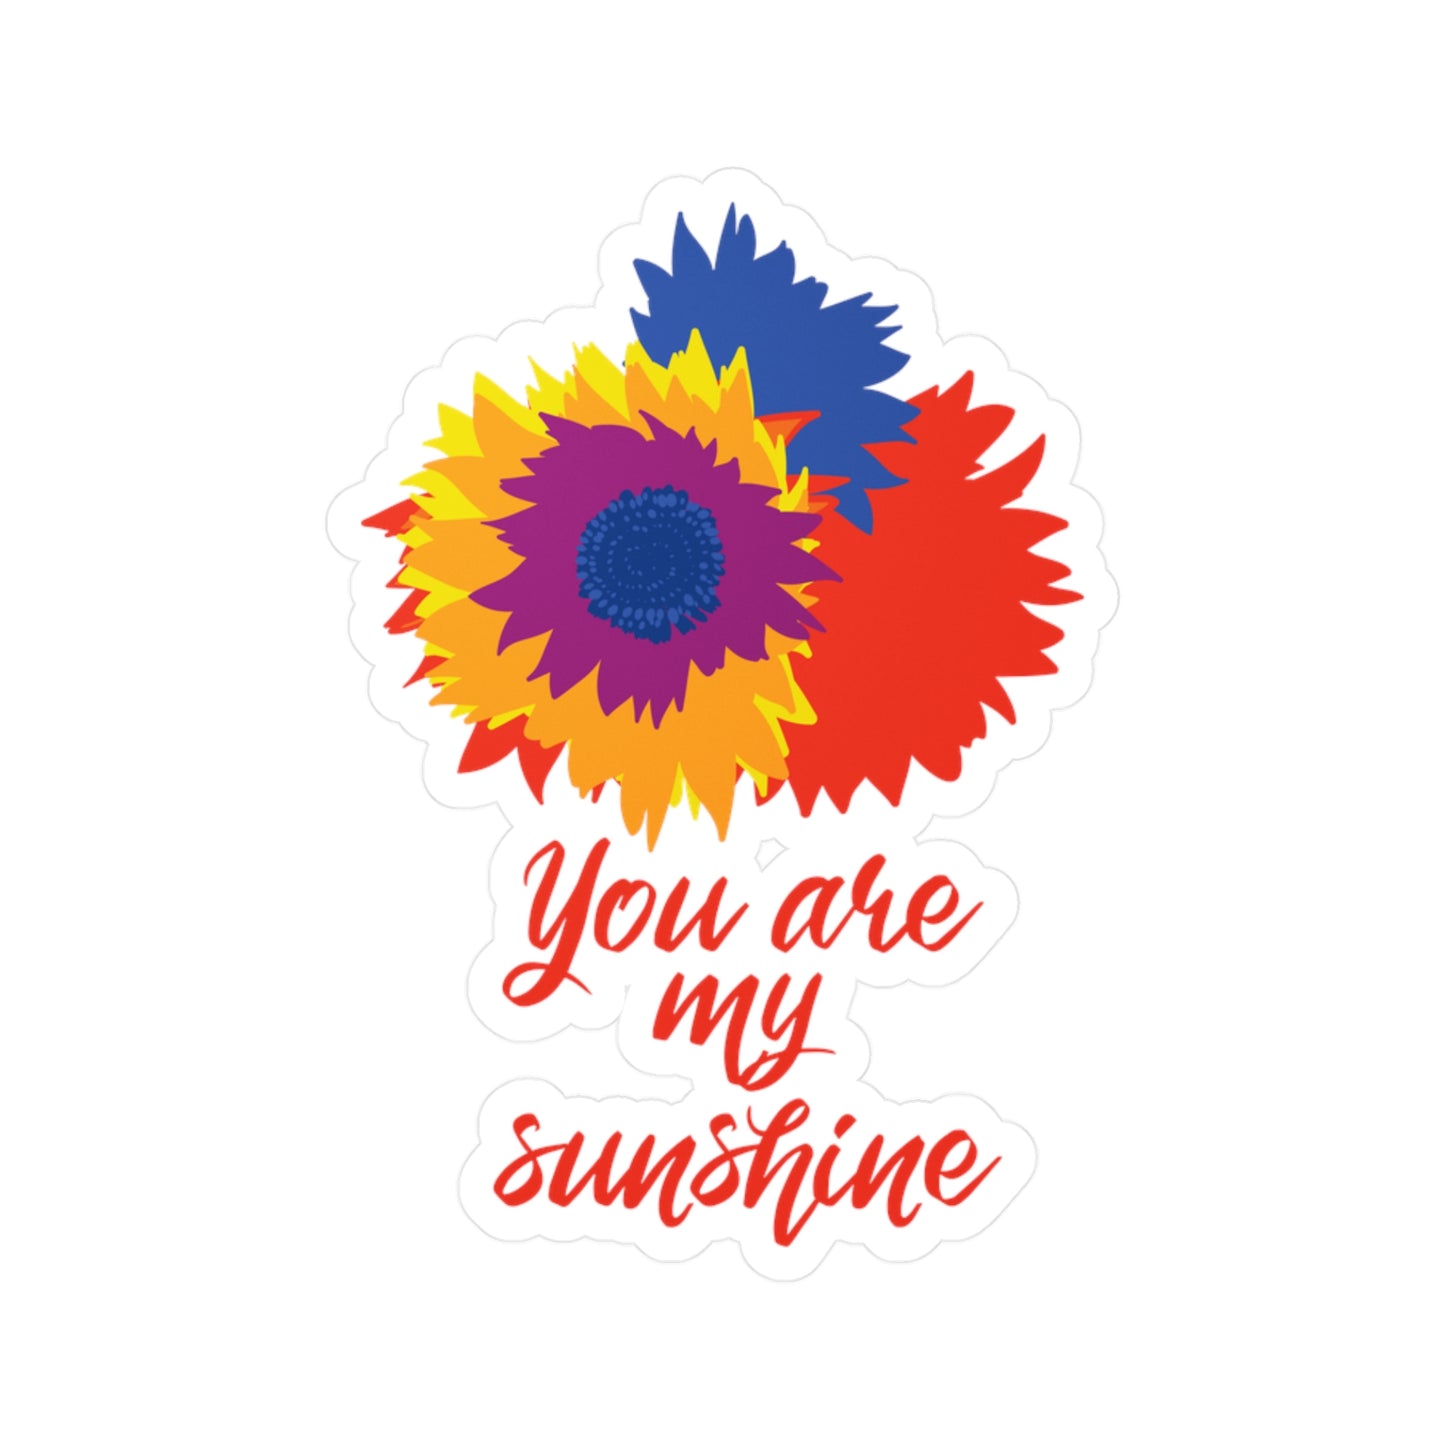 You Are My Sunshine Kiss-Cut Vinyl Decal